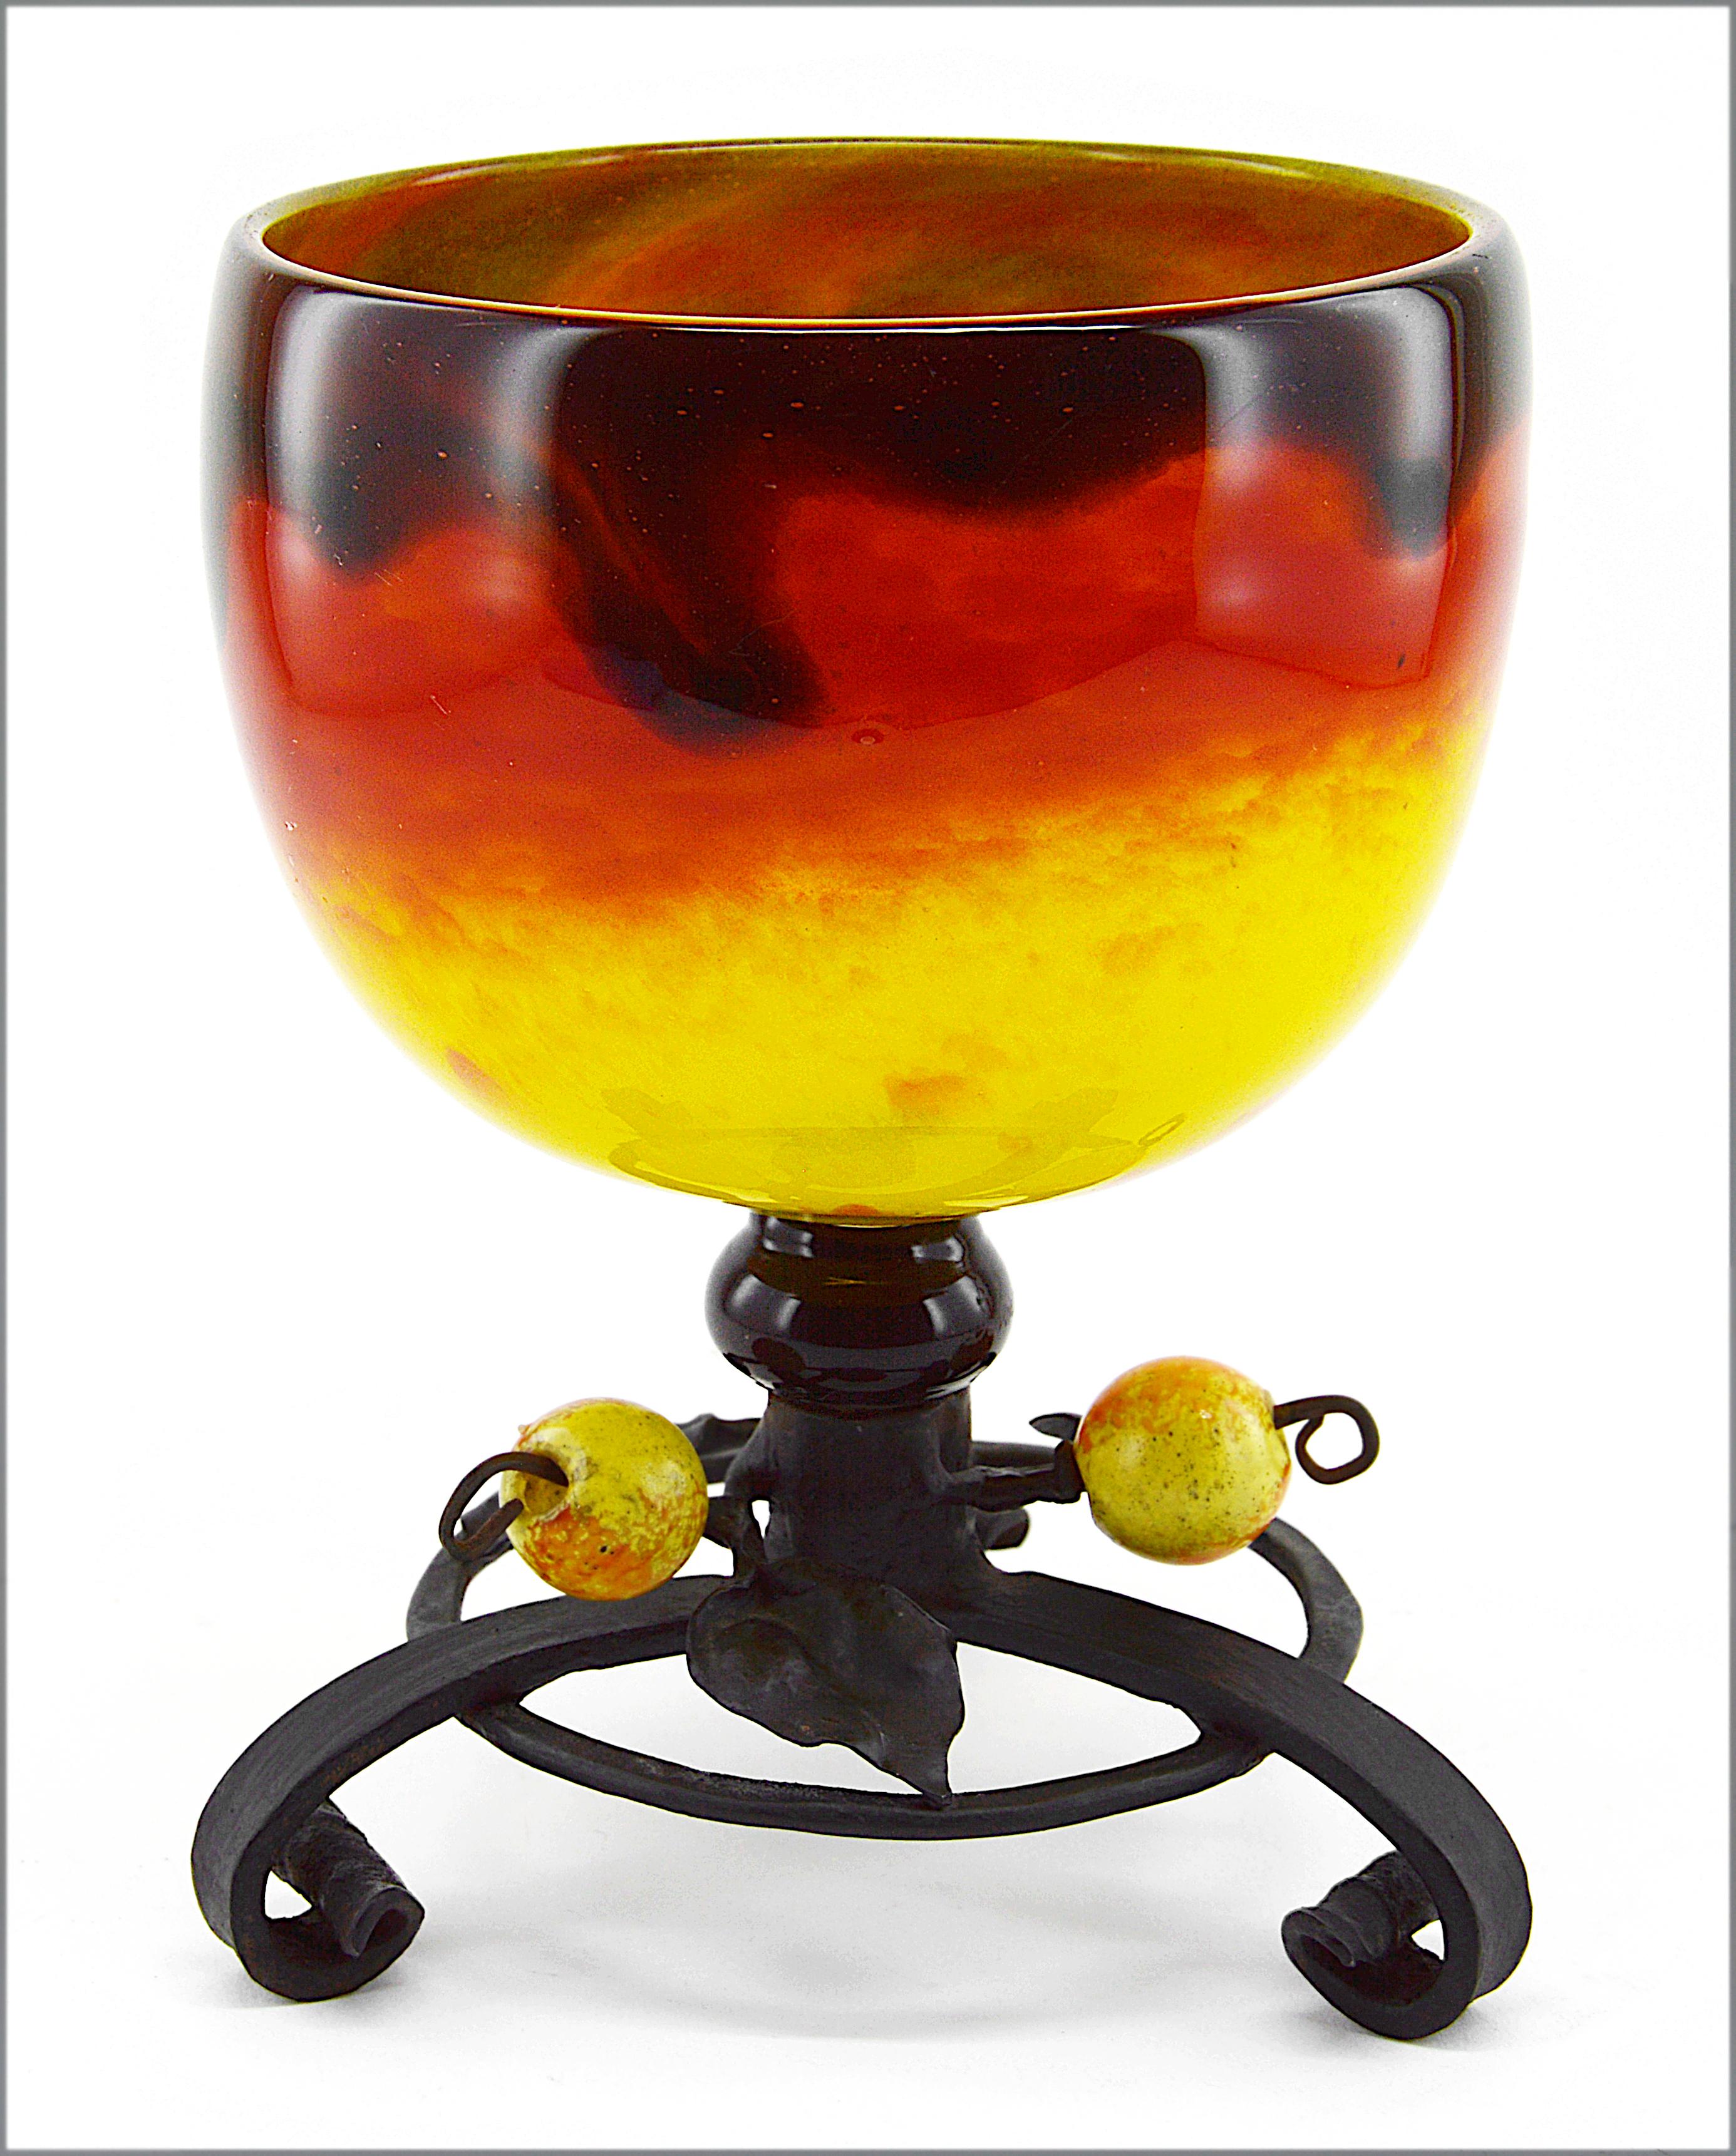 French Art Deco vase by Charles Schneider Epinay-sur-Seine (Paris), 1914-1918. Unusual vase colored with bright yellow and rich orange colors overlaid with a veil of dark brown/black. Wrought-iron base made by Schneider in a workshop of the factory